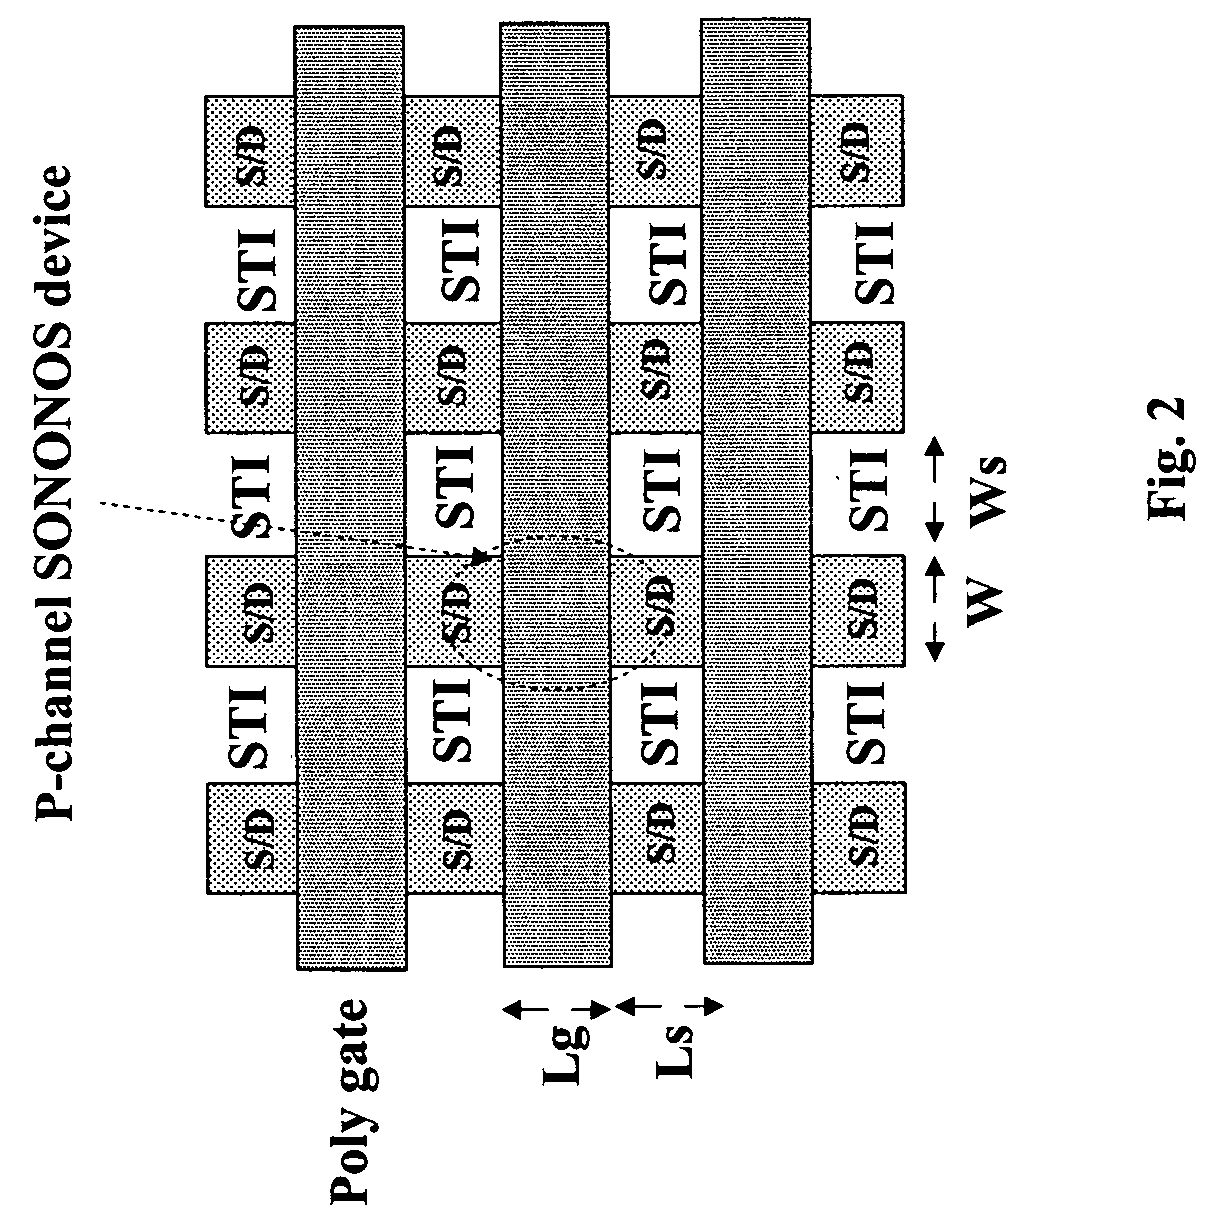 Methods of operating p-channel non-volatile memory devices